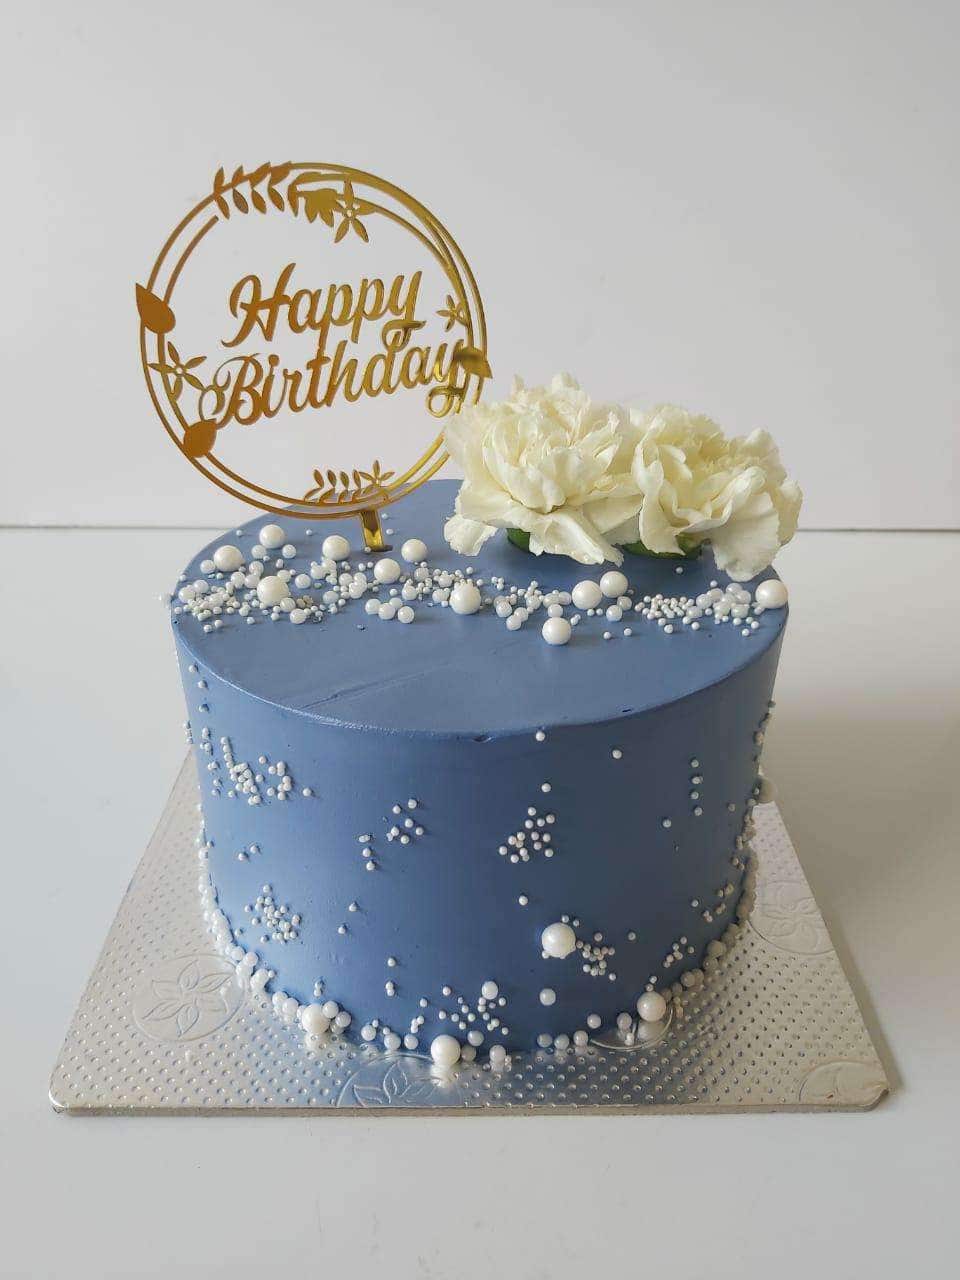 Cake Delights Cake Delivery Service in Model TownPatiala  Best Bakeries  in Patiala  Justdial